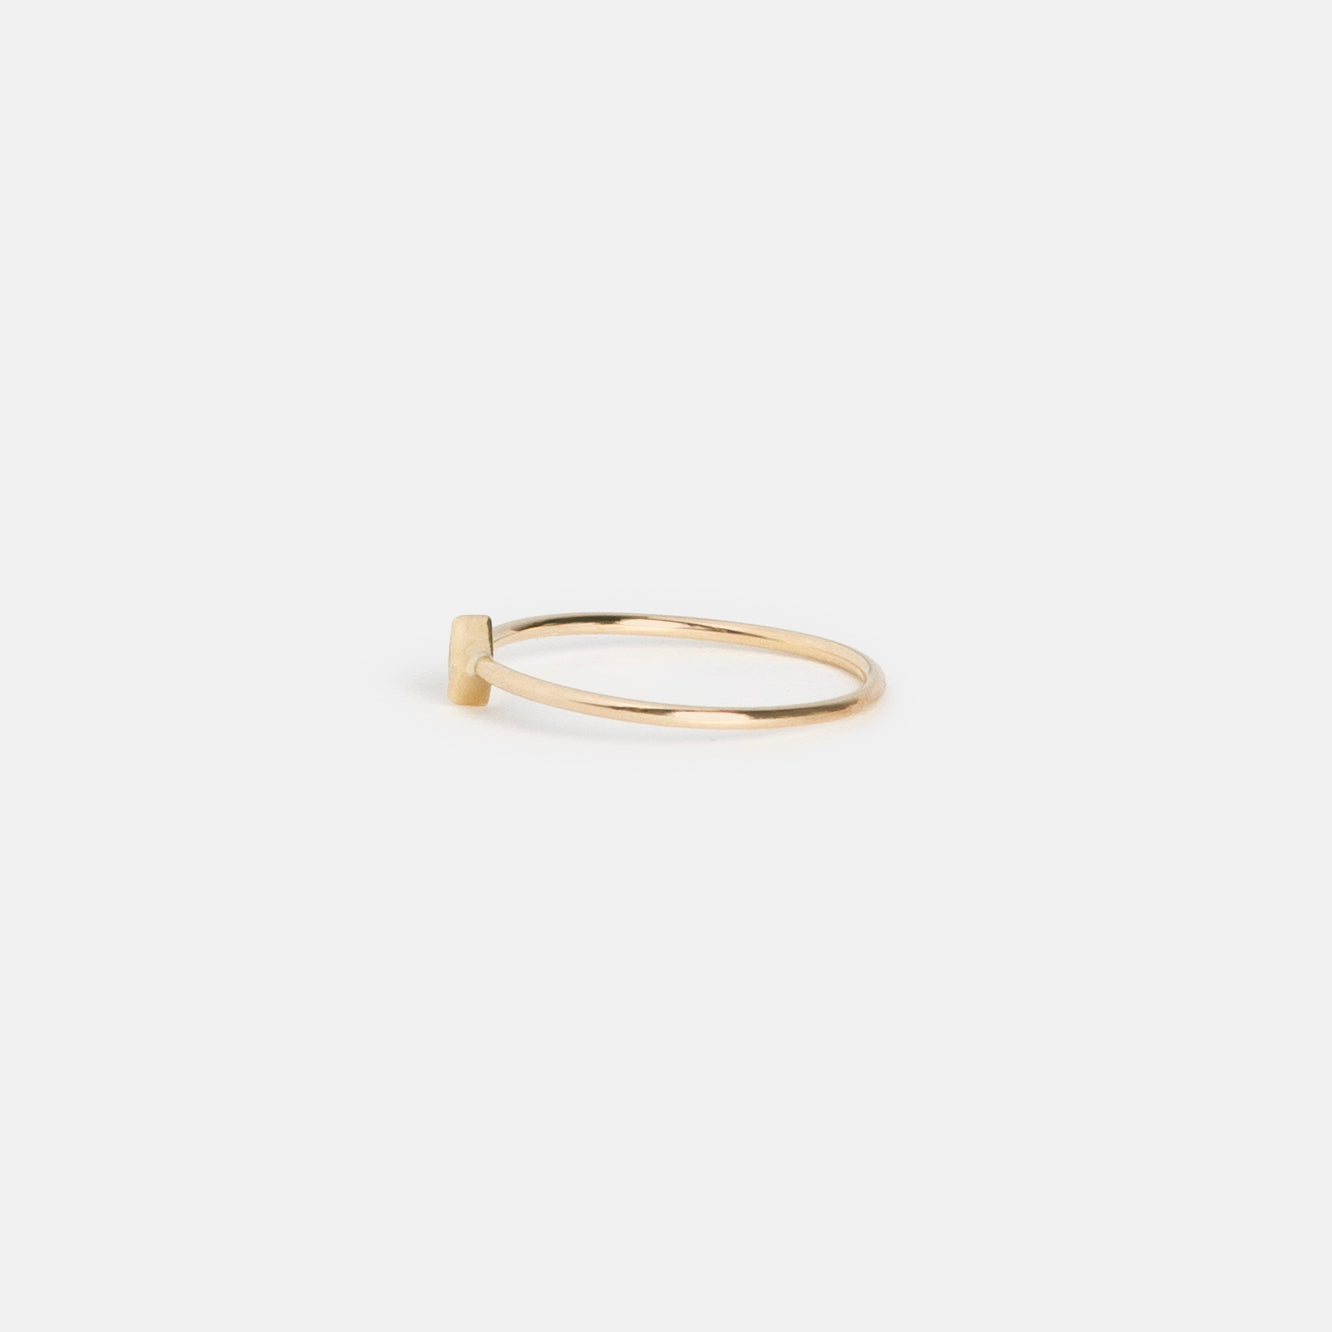 Small Ona Thin Ring in 14k Gold set with Emerald by SHW Fine Jewelry